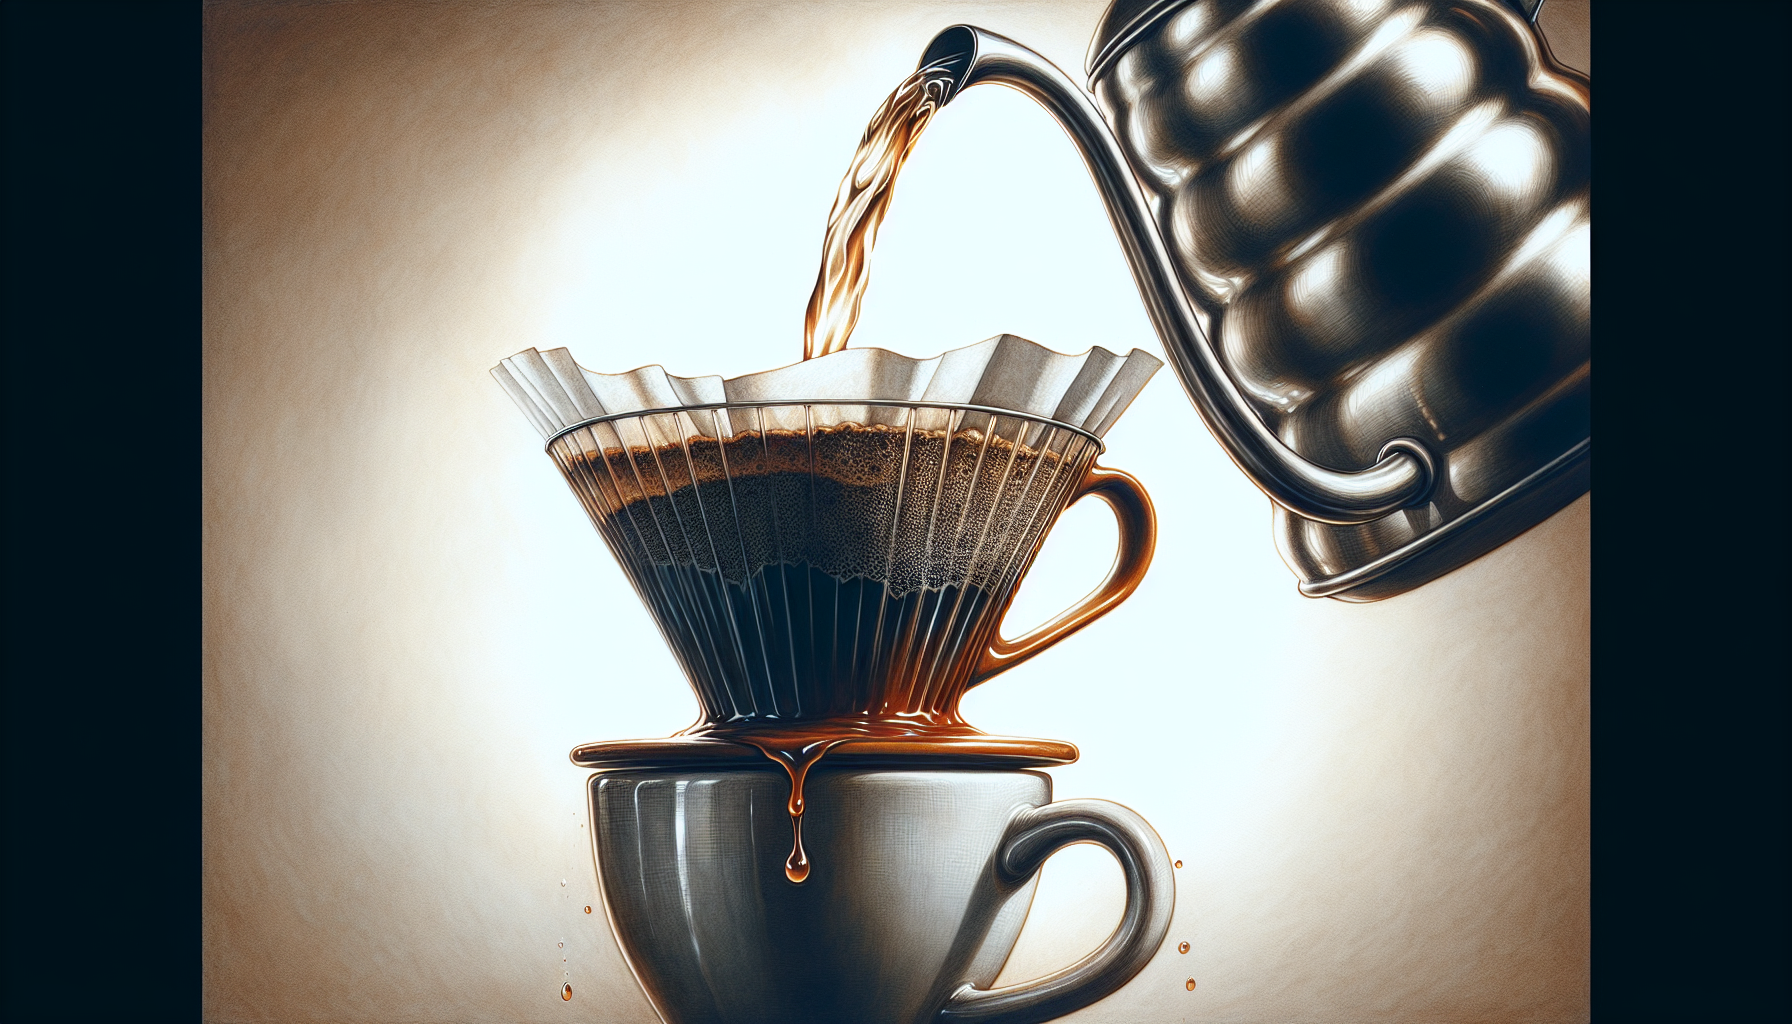 Illustration of a pour over coffee setup with a kettle, dripper, and coffee cup